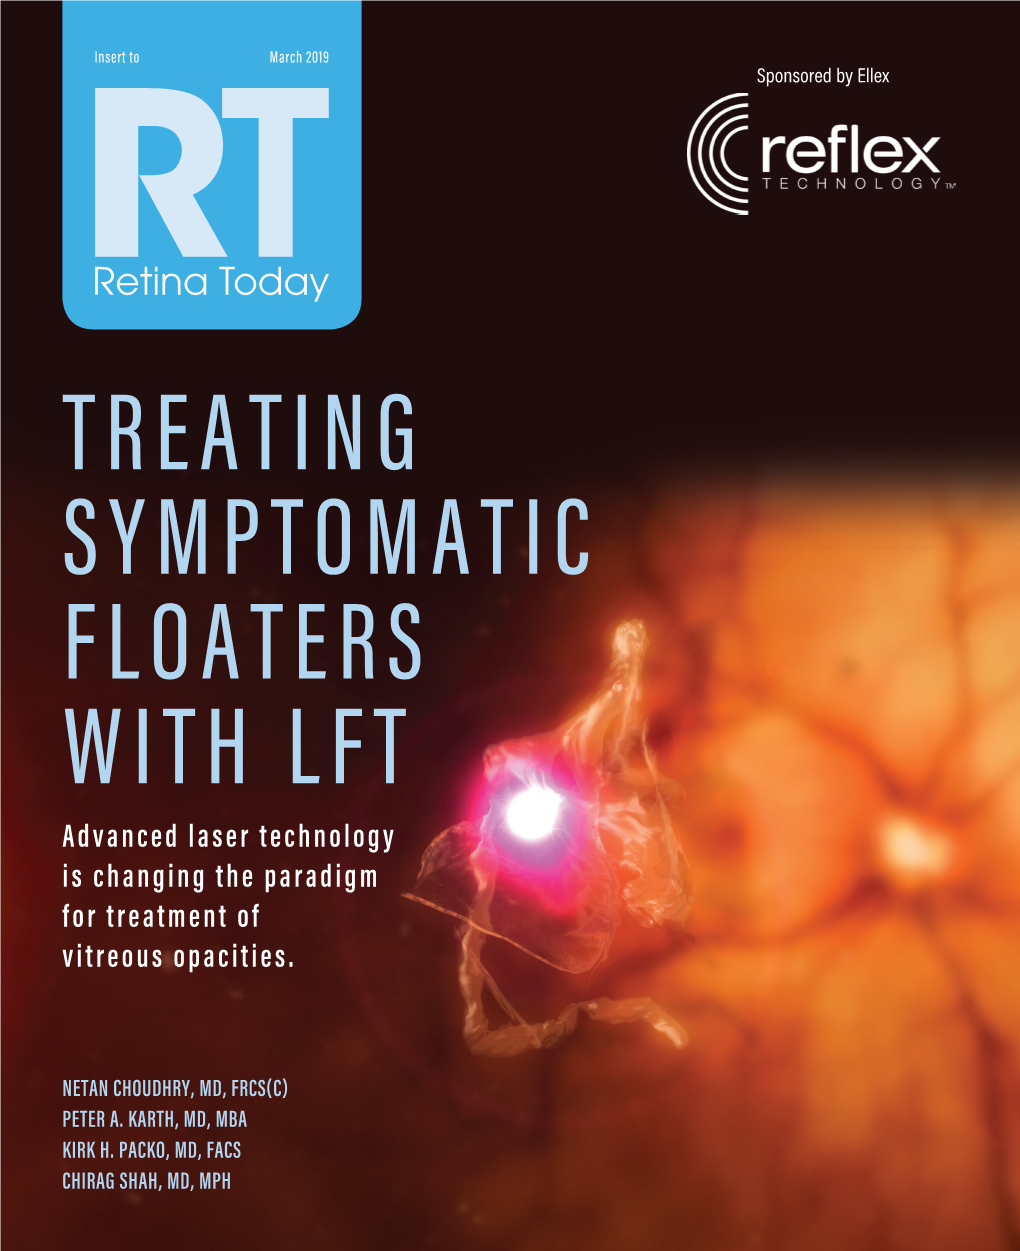 TREATING SYMPTOMATIC FLOATERS with LFT Advanced Laser Technology Is Changing the Paradigm for Treatment of Vitreous Opacities